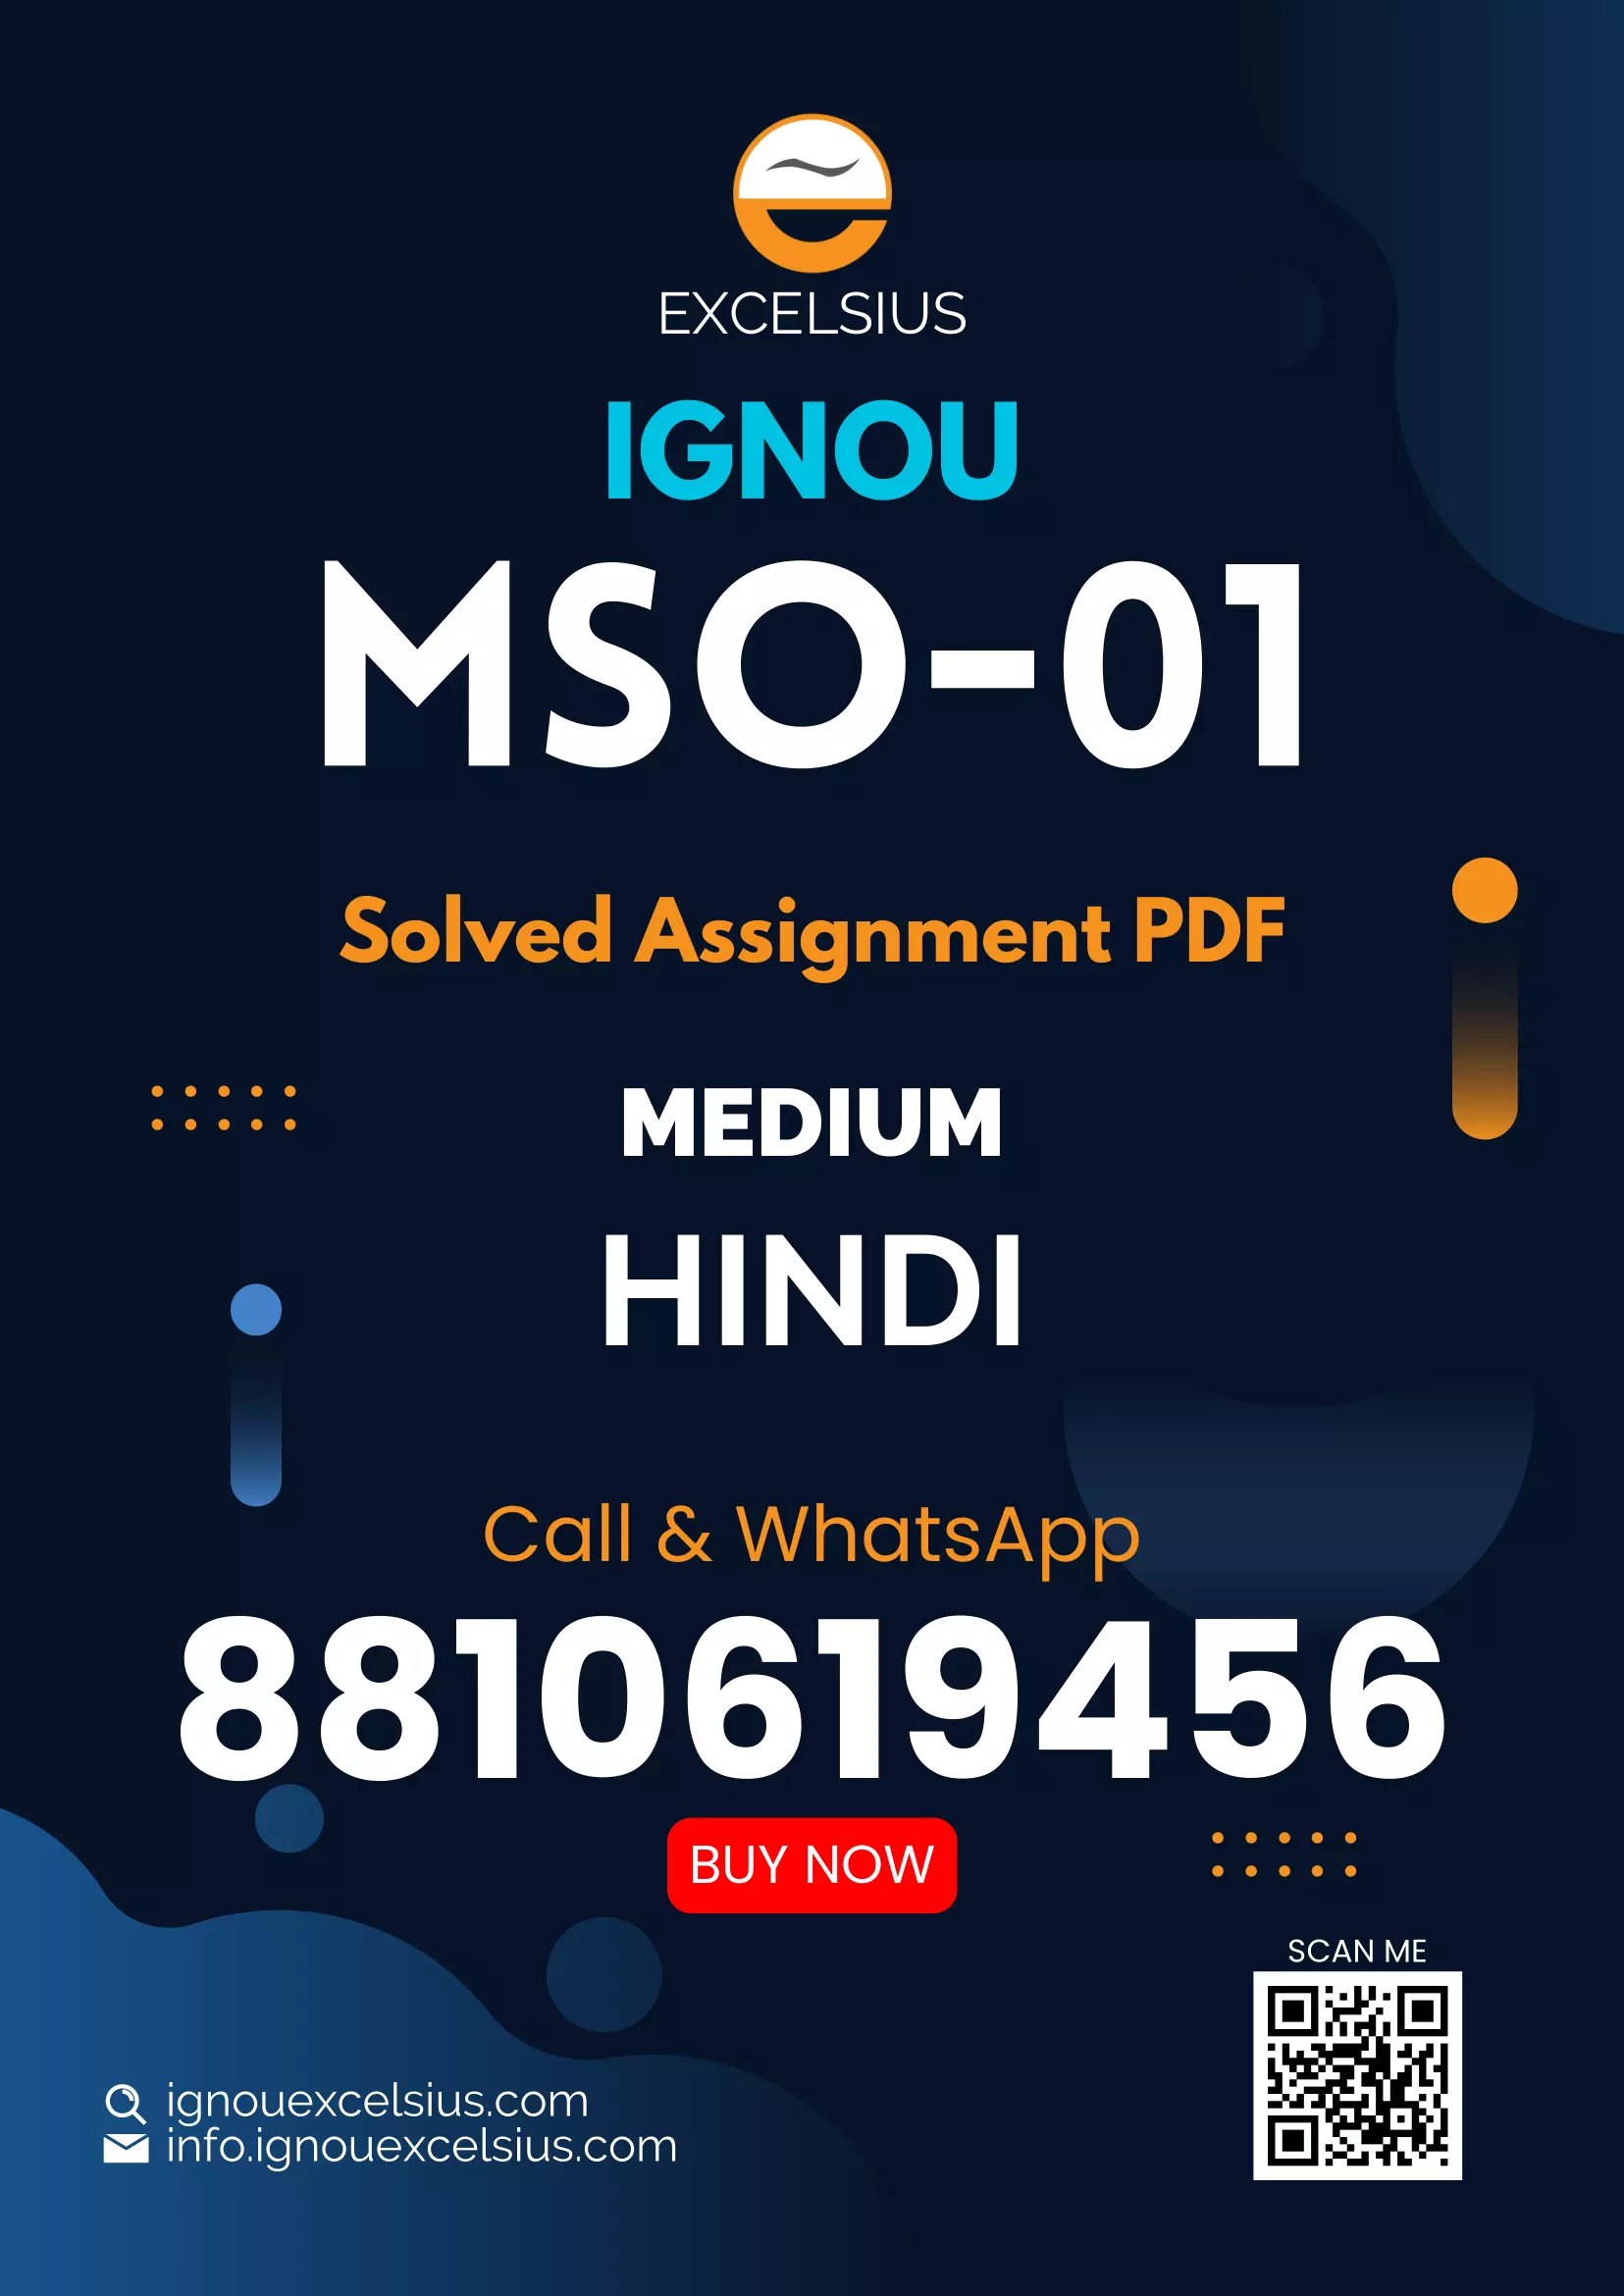 IGNOU MSO-01 - Sociological Theories and Concepts, Latest Solved Assignment-July 2022 – January 2023